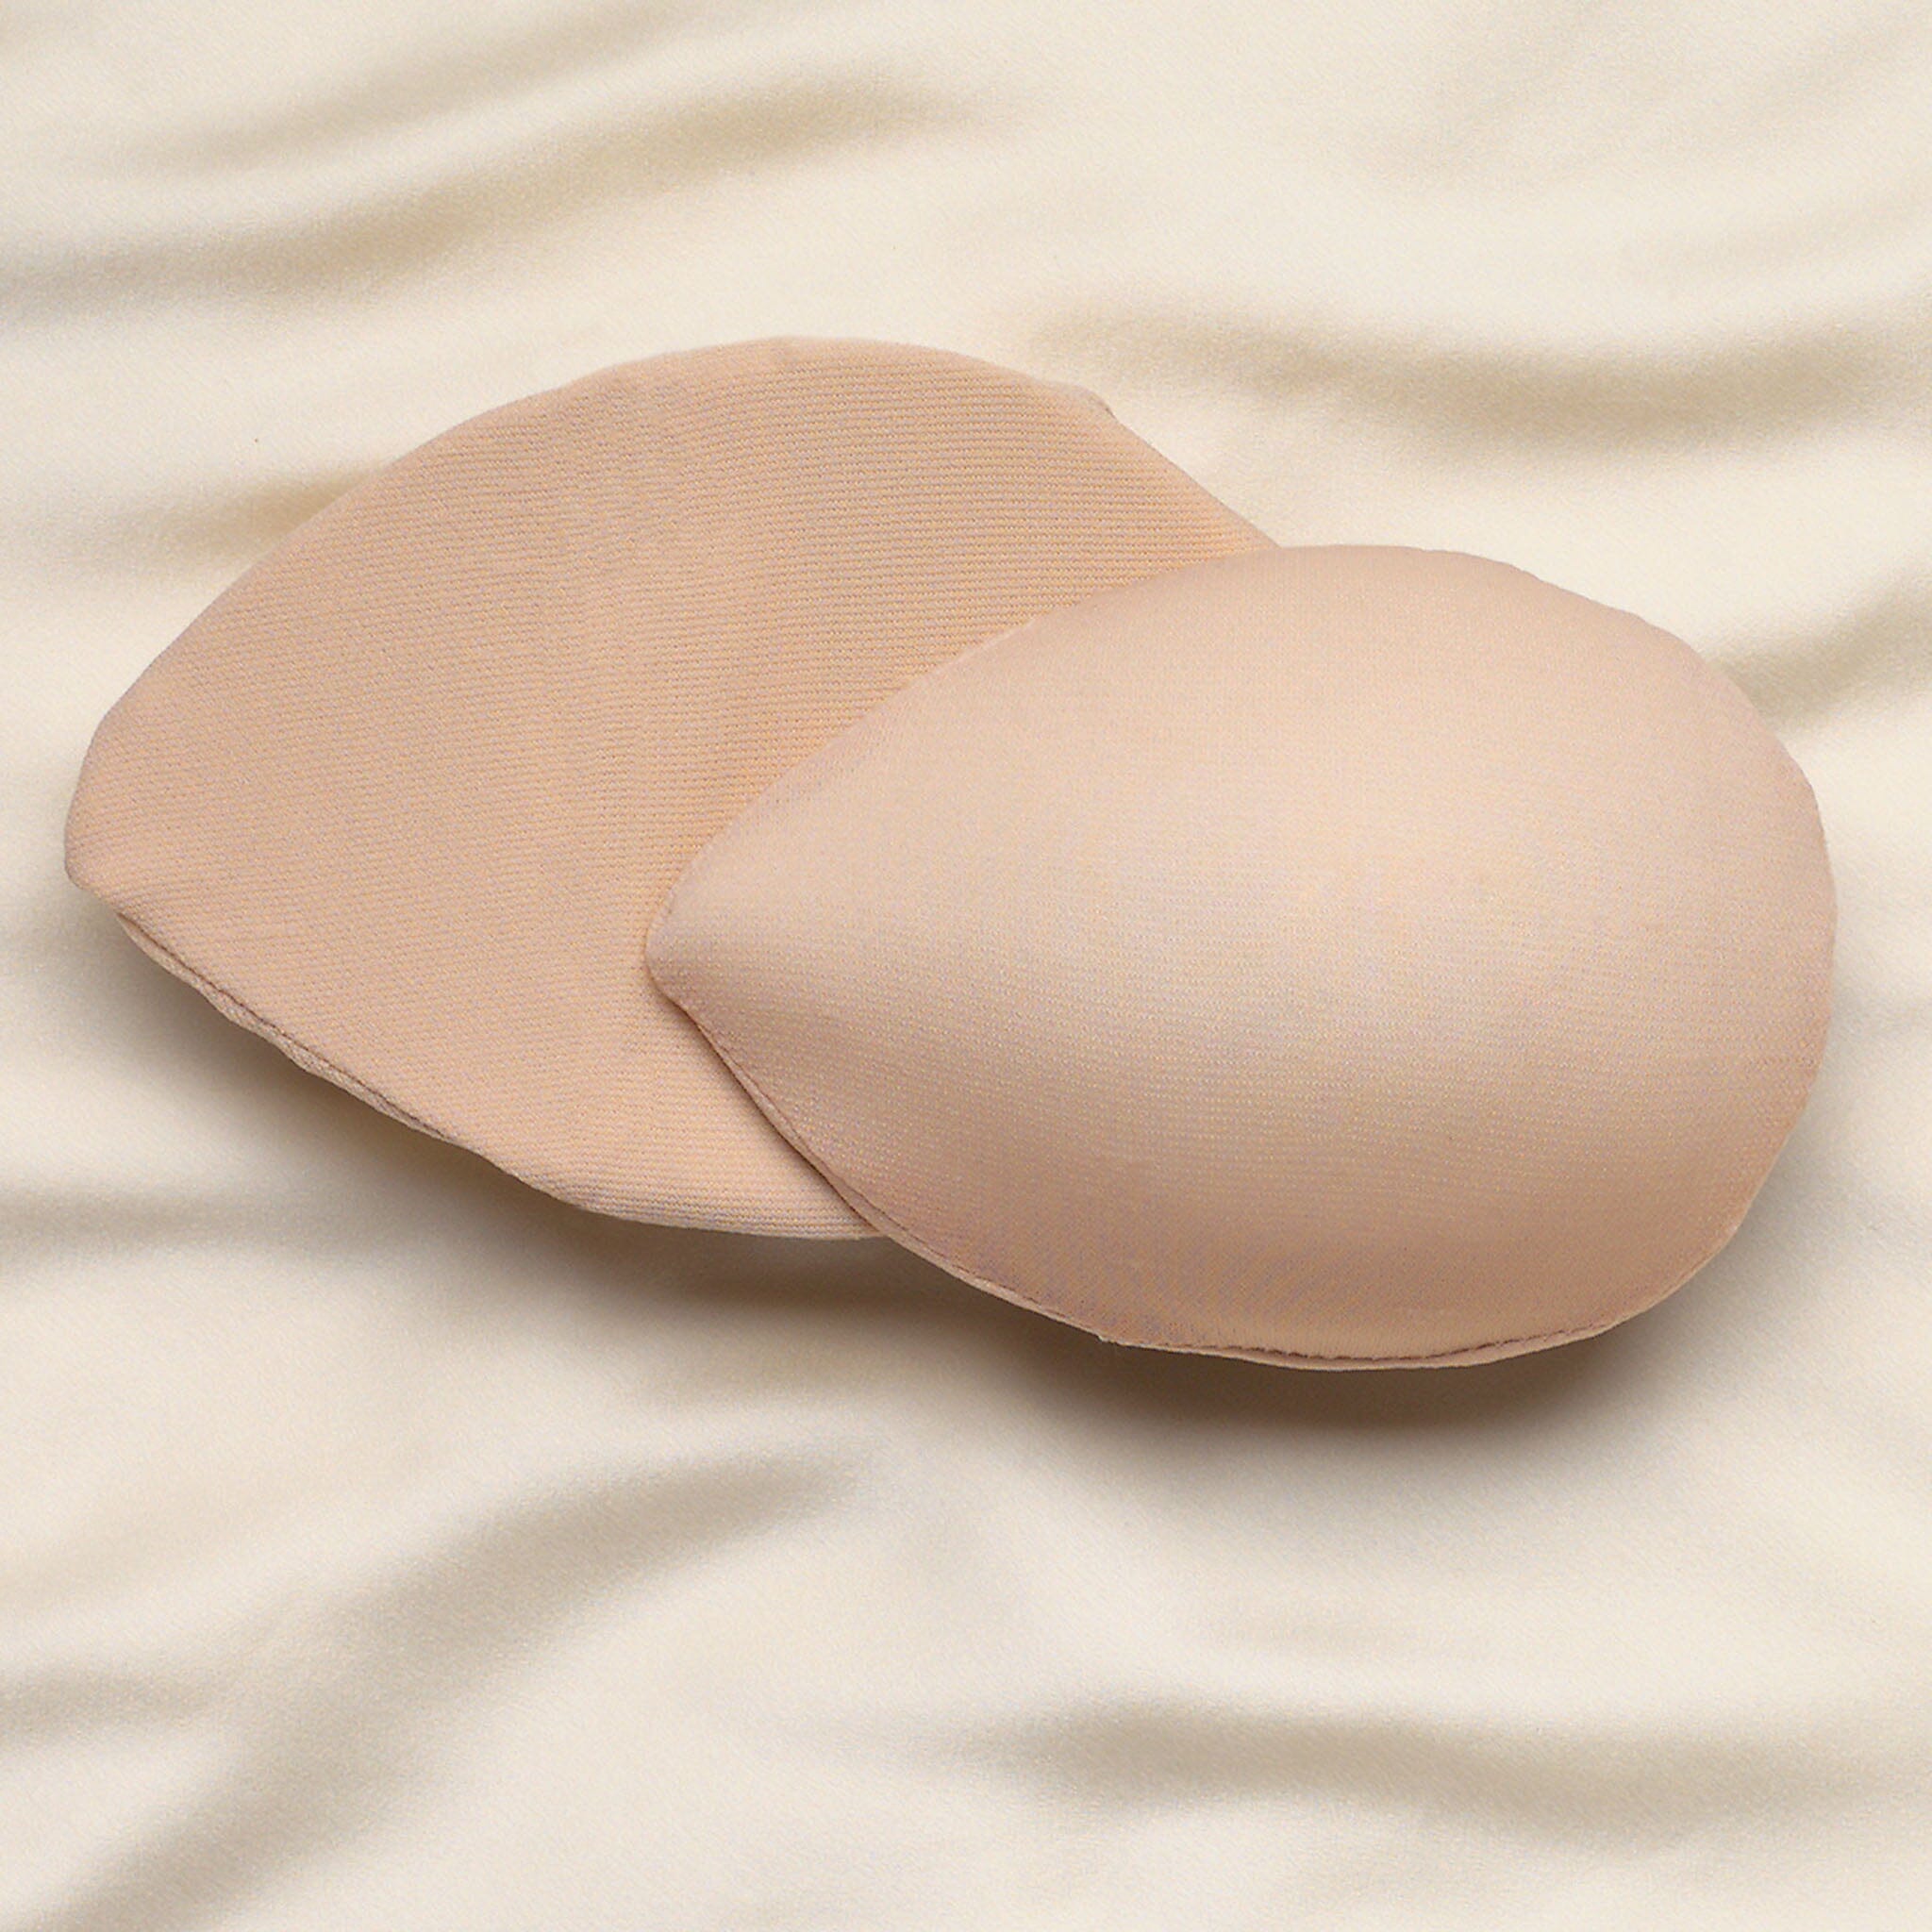 Teardrop Breast Forms Silicone Breast Forms Breast Prosthesis 0000